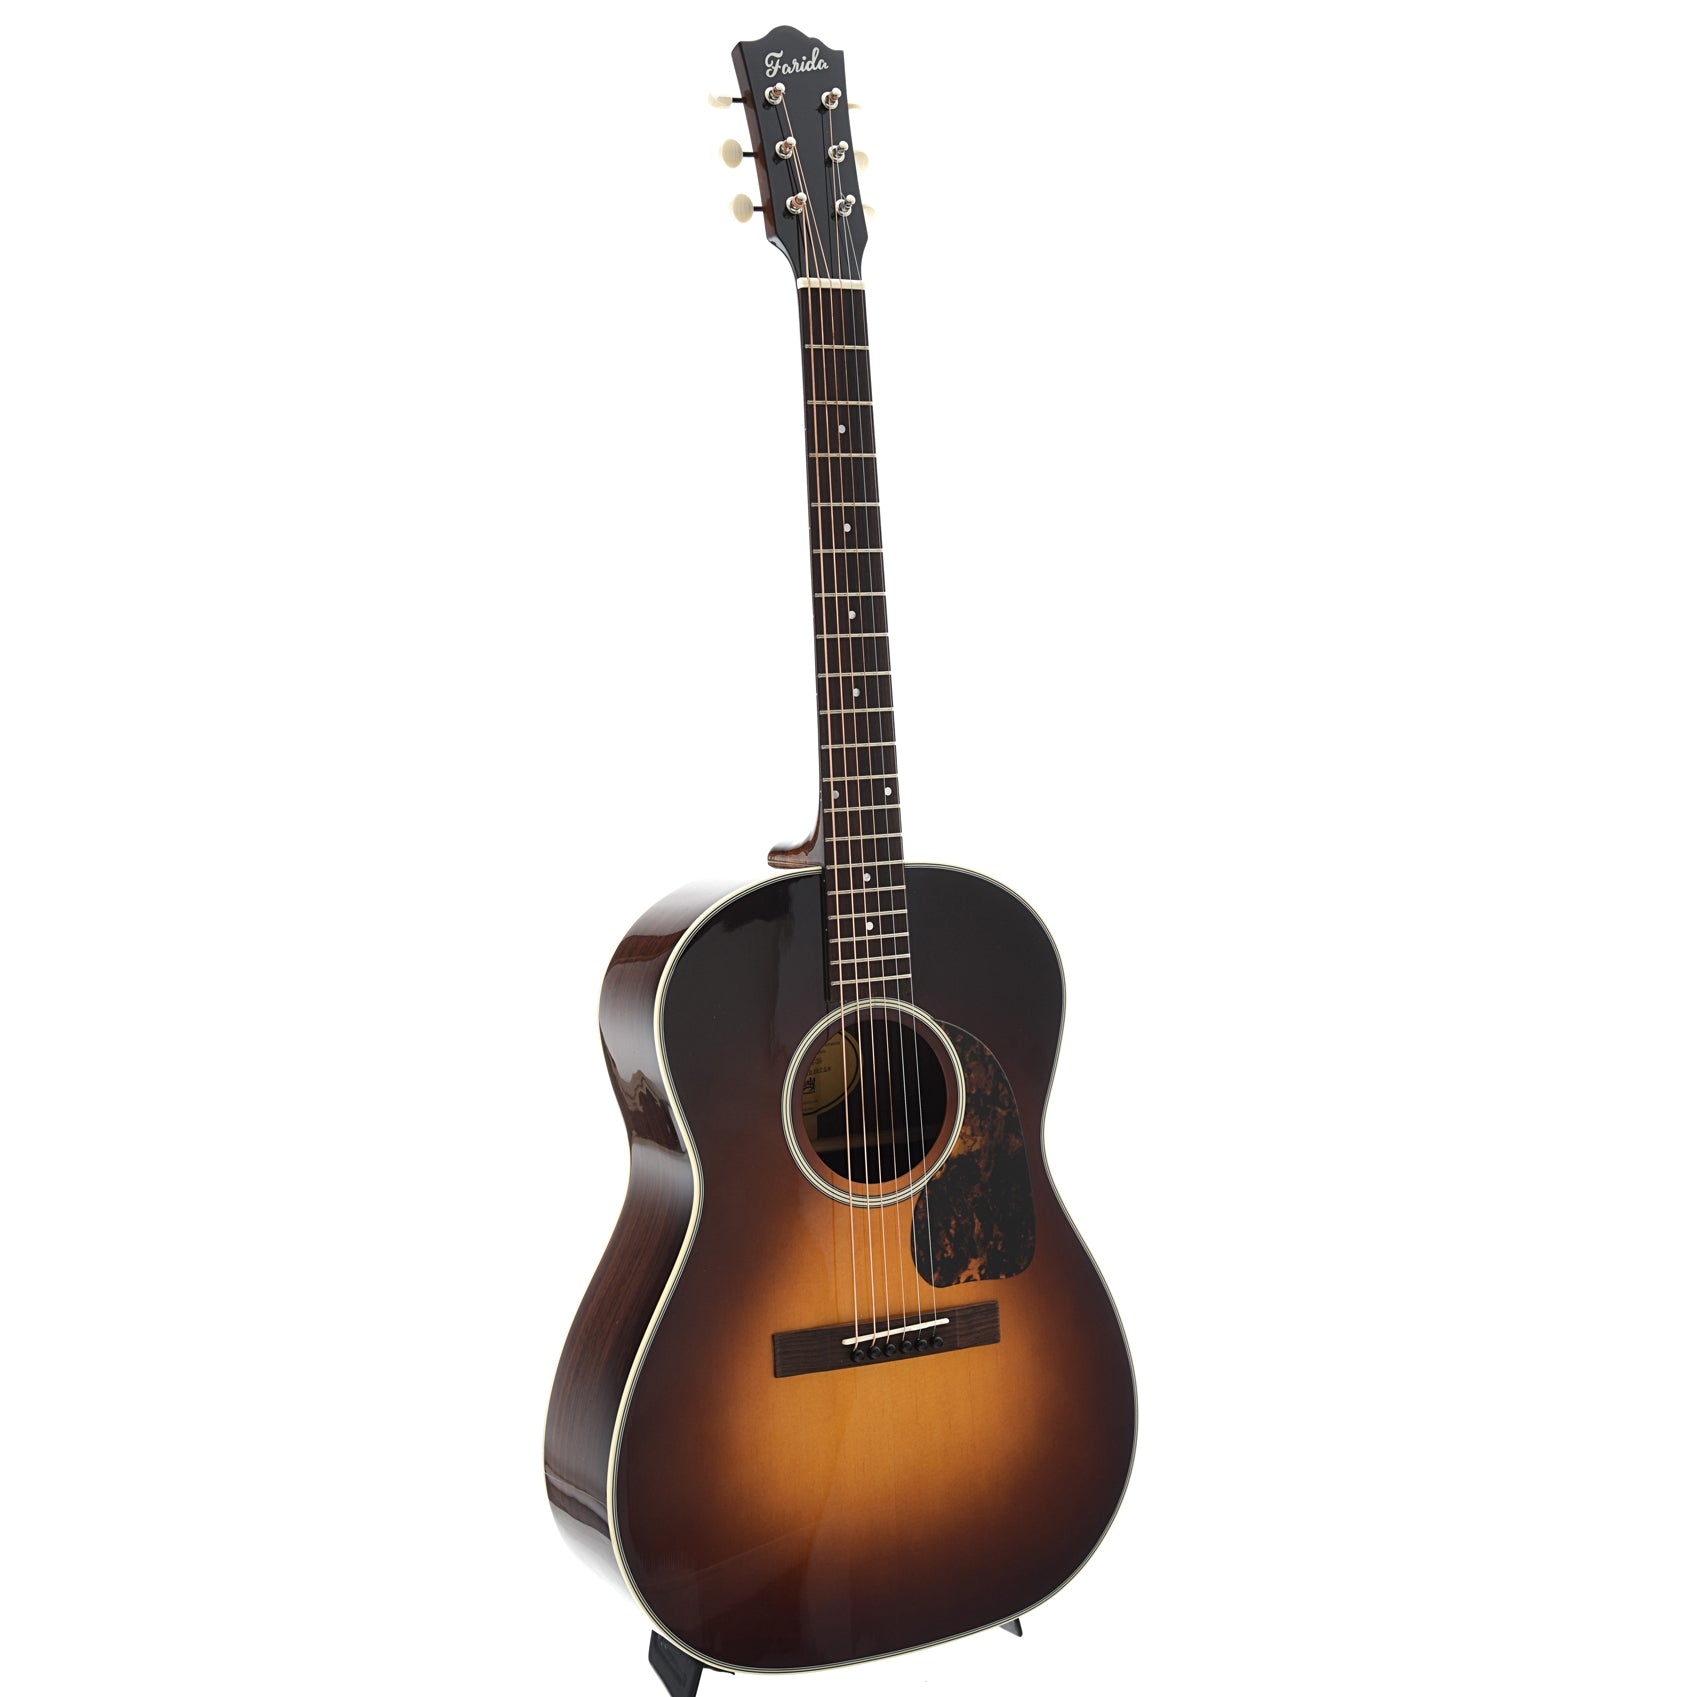 Farida Old Town Series OT-26 VBS Acoustic Guitar – Elderly Instruments